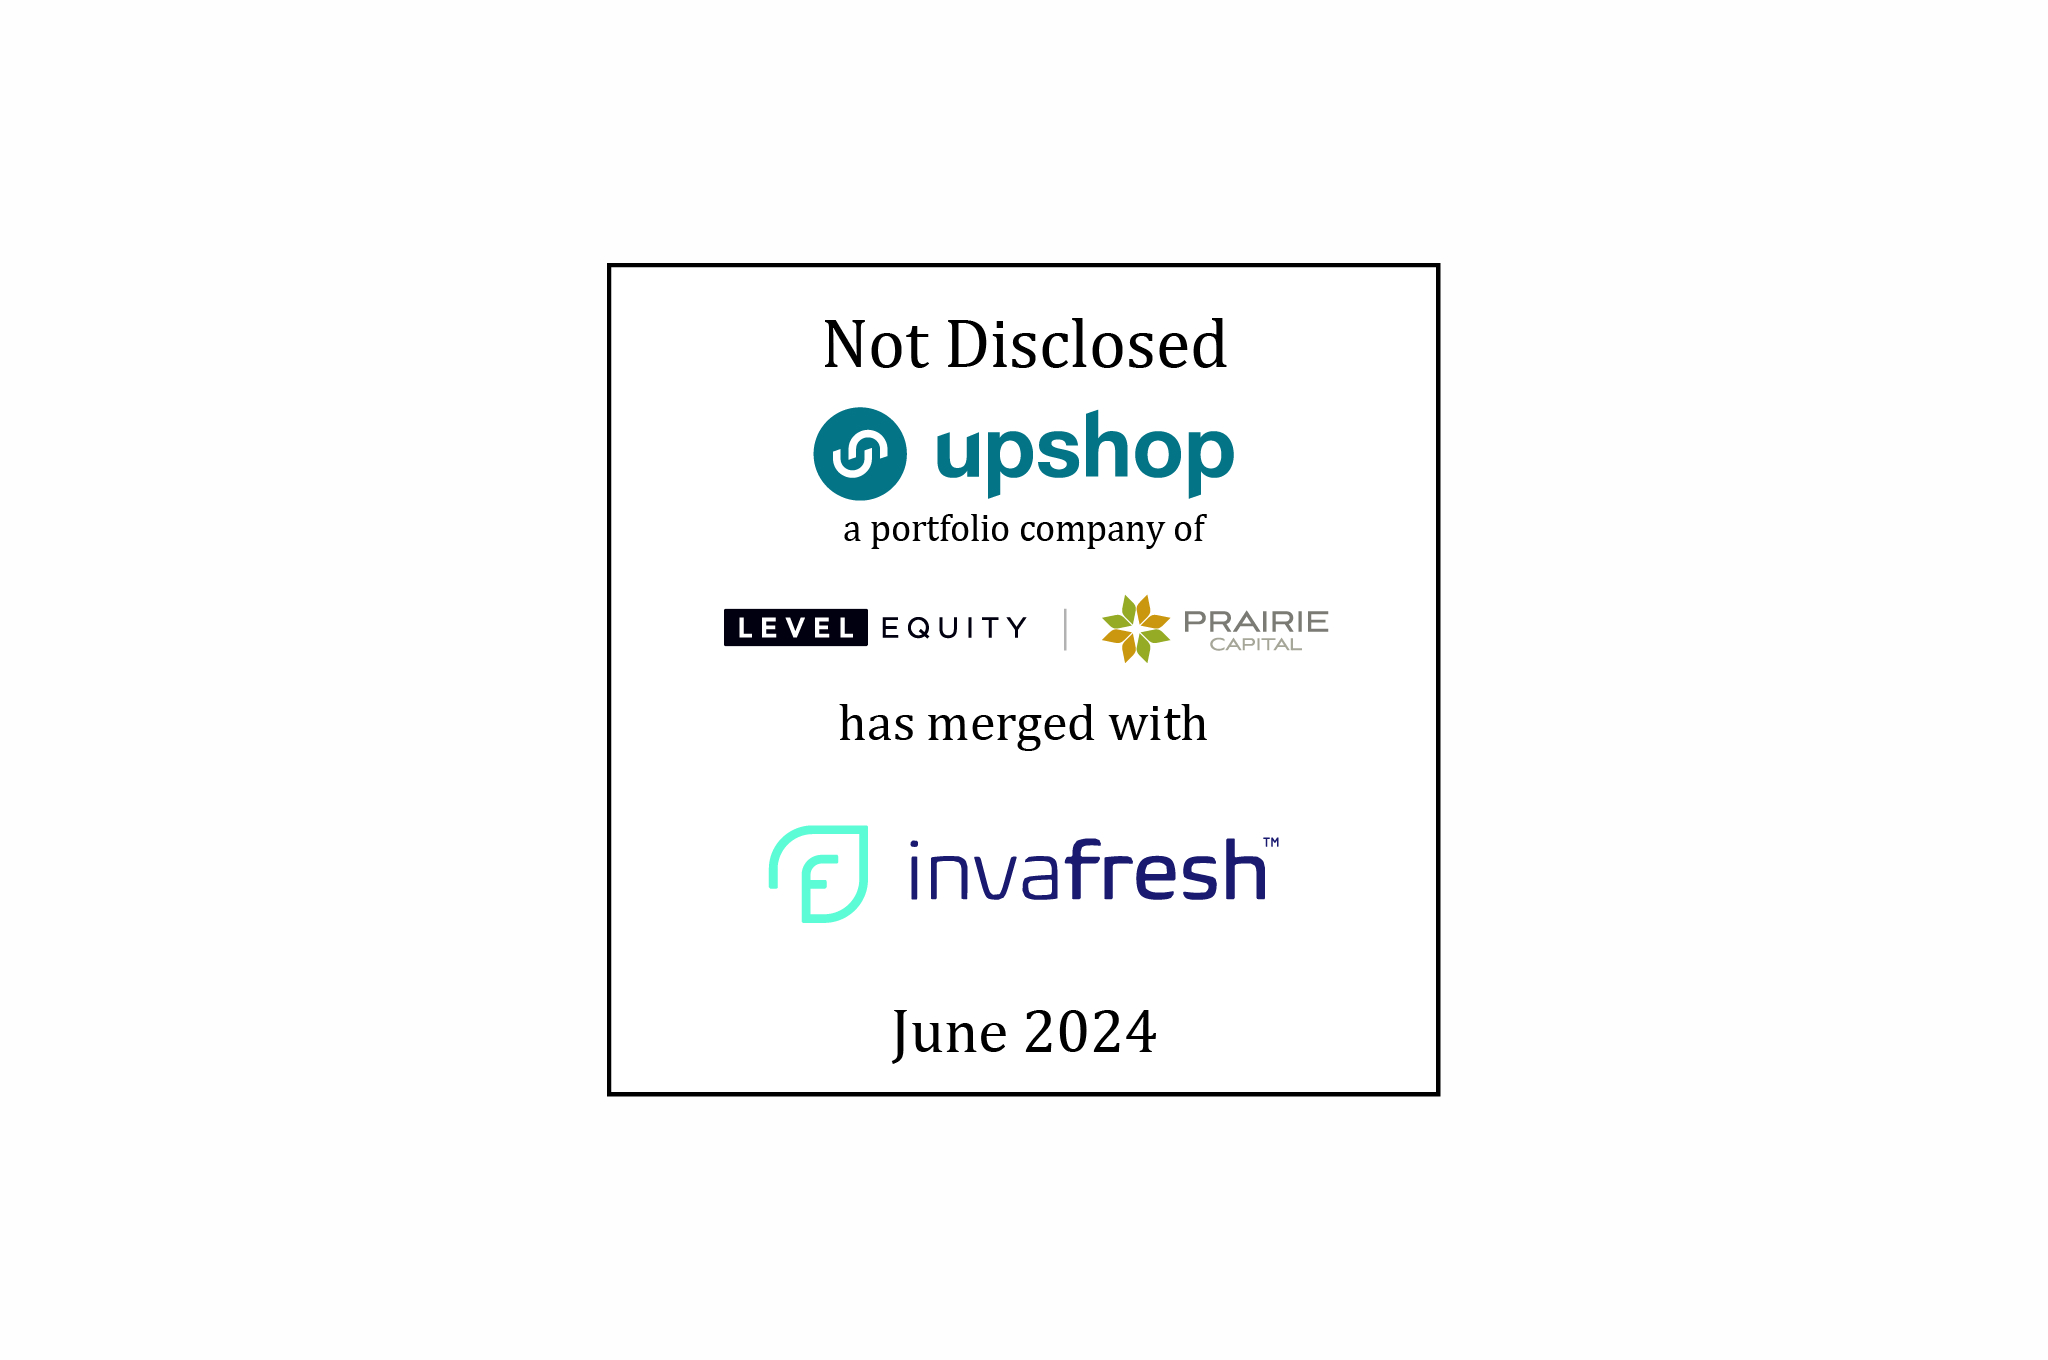 Not disclosed - upshop a portfolio company of Level Equity and Prairie Capital has merged with invafresh - June 2024